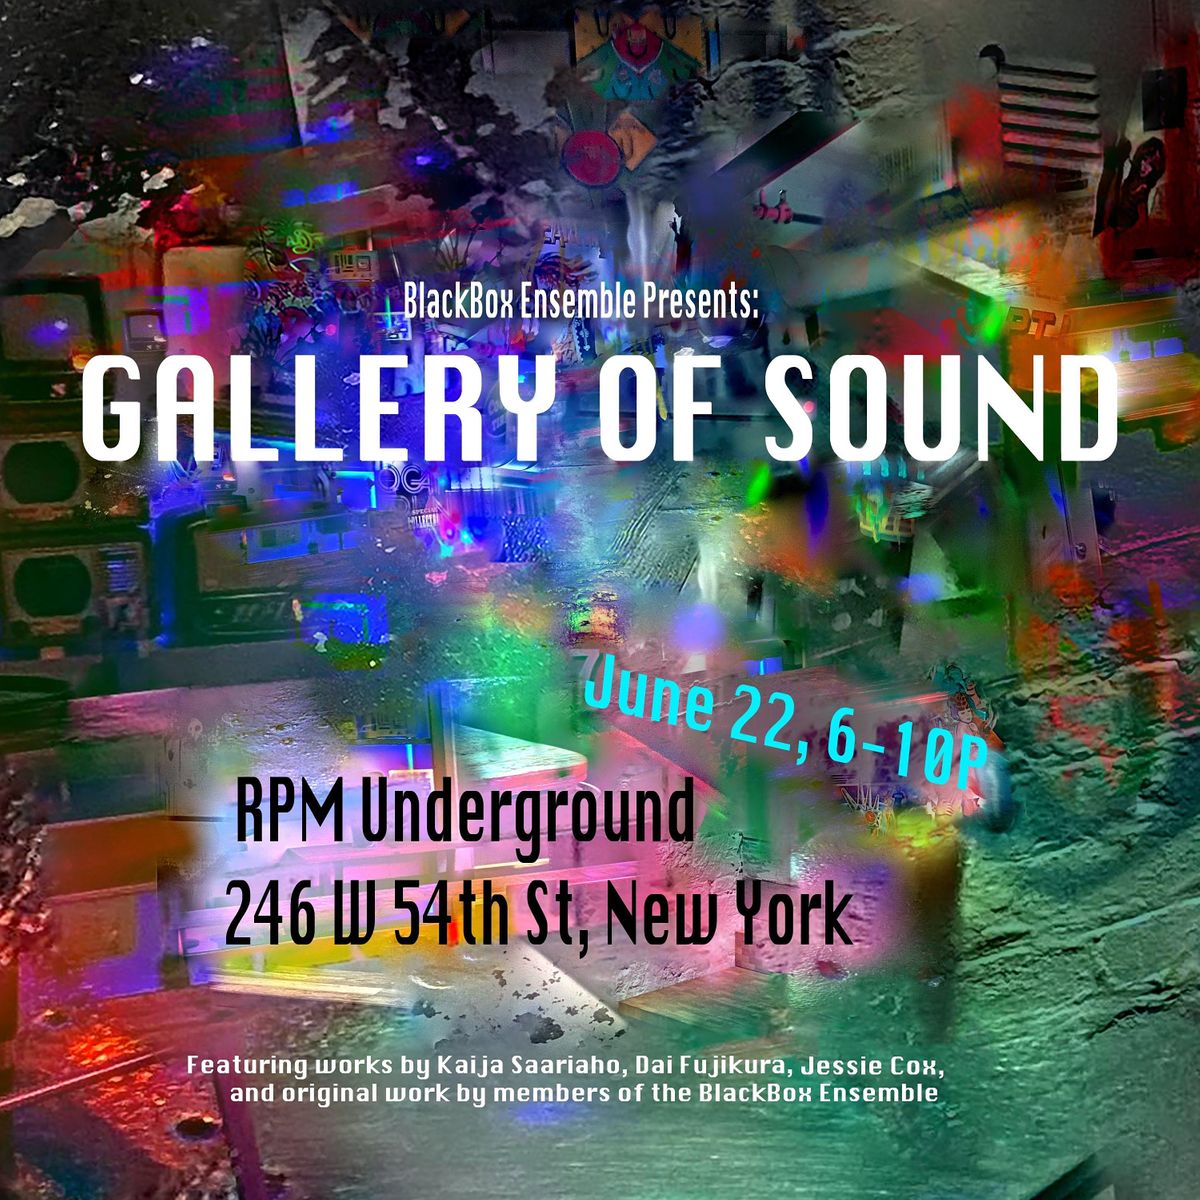 Gallery of Sound